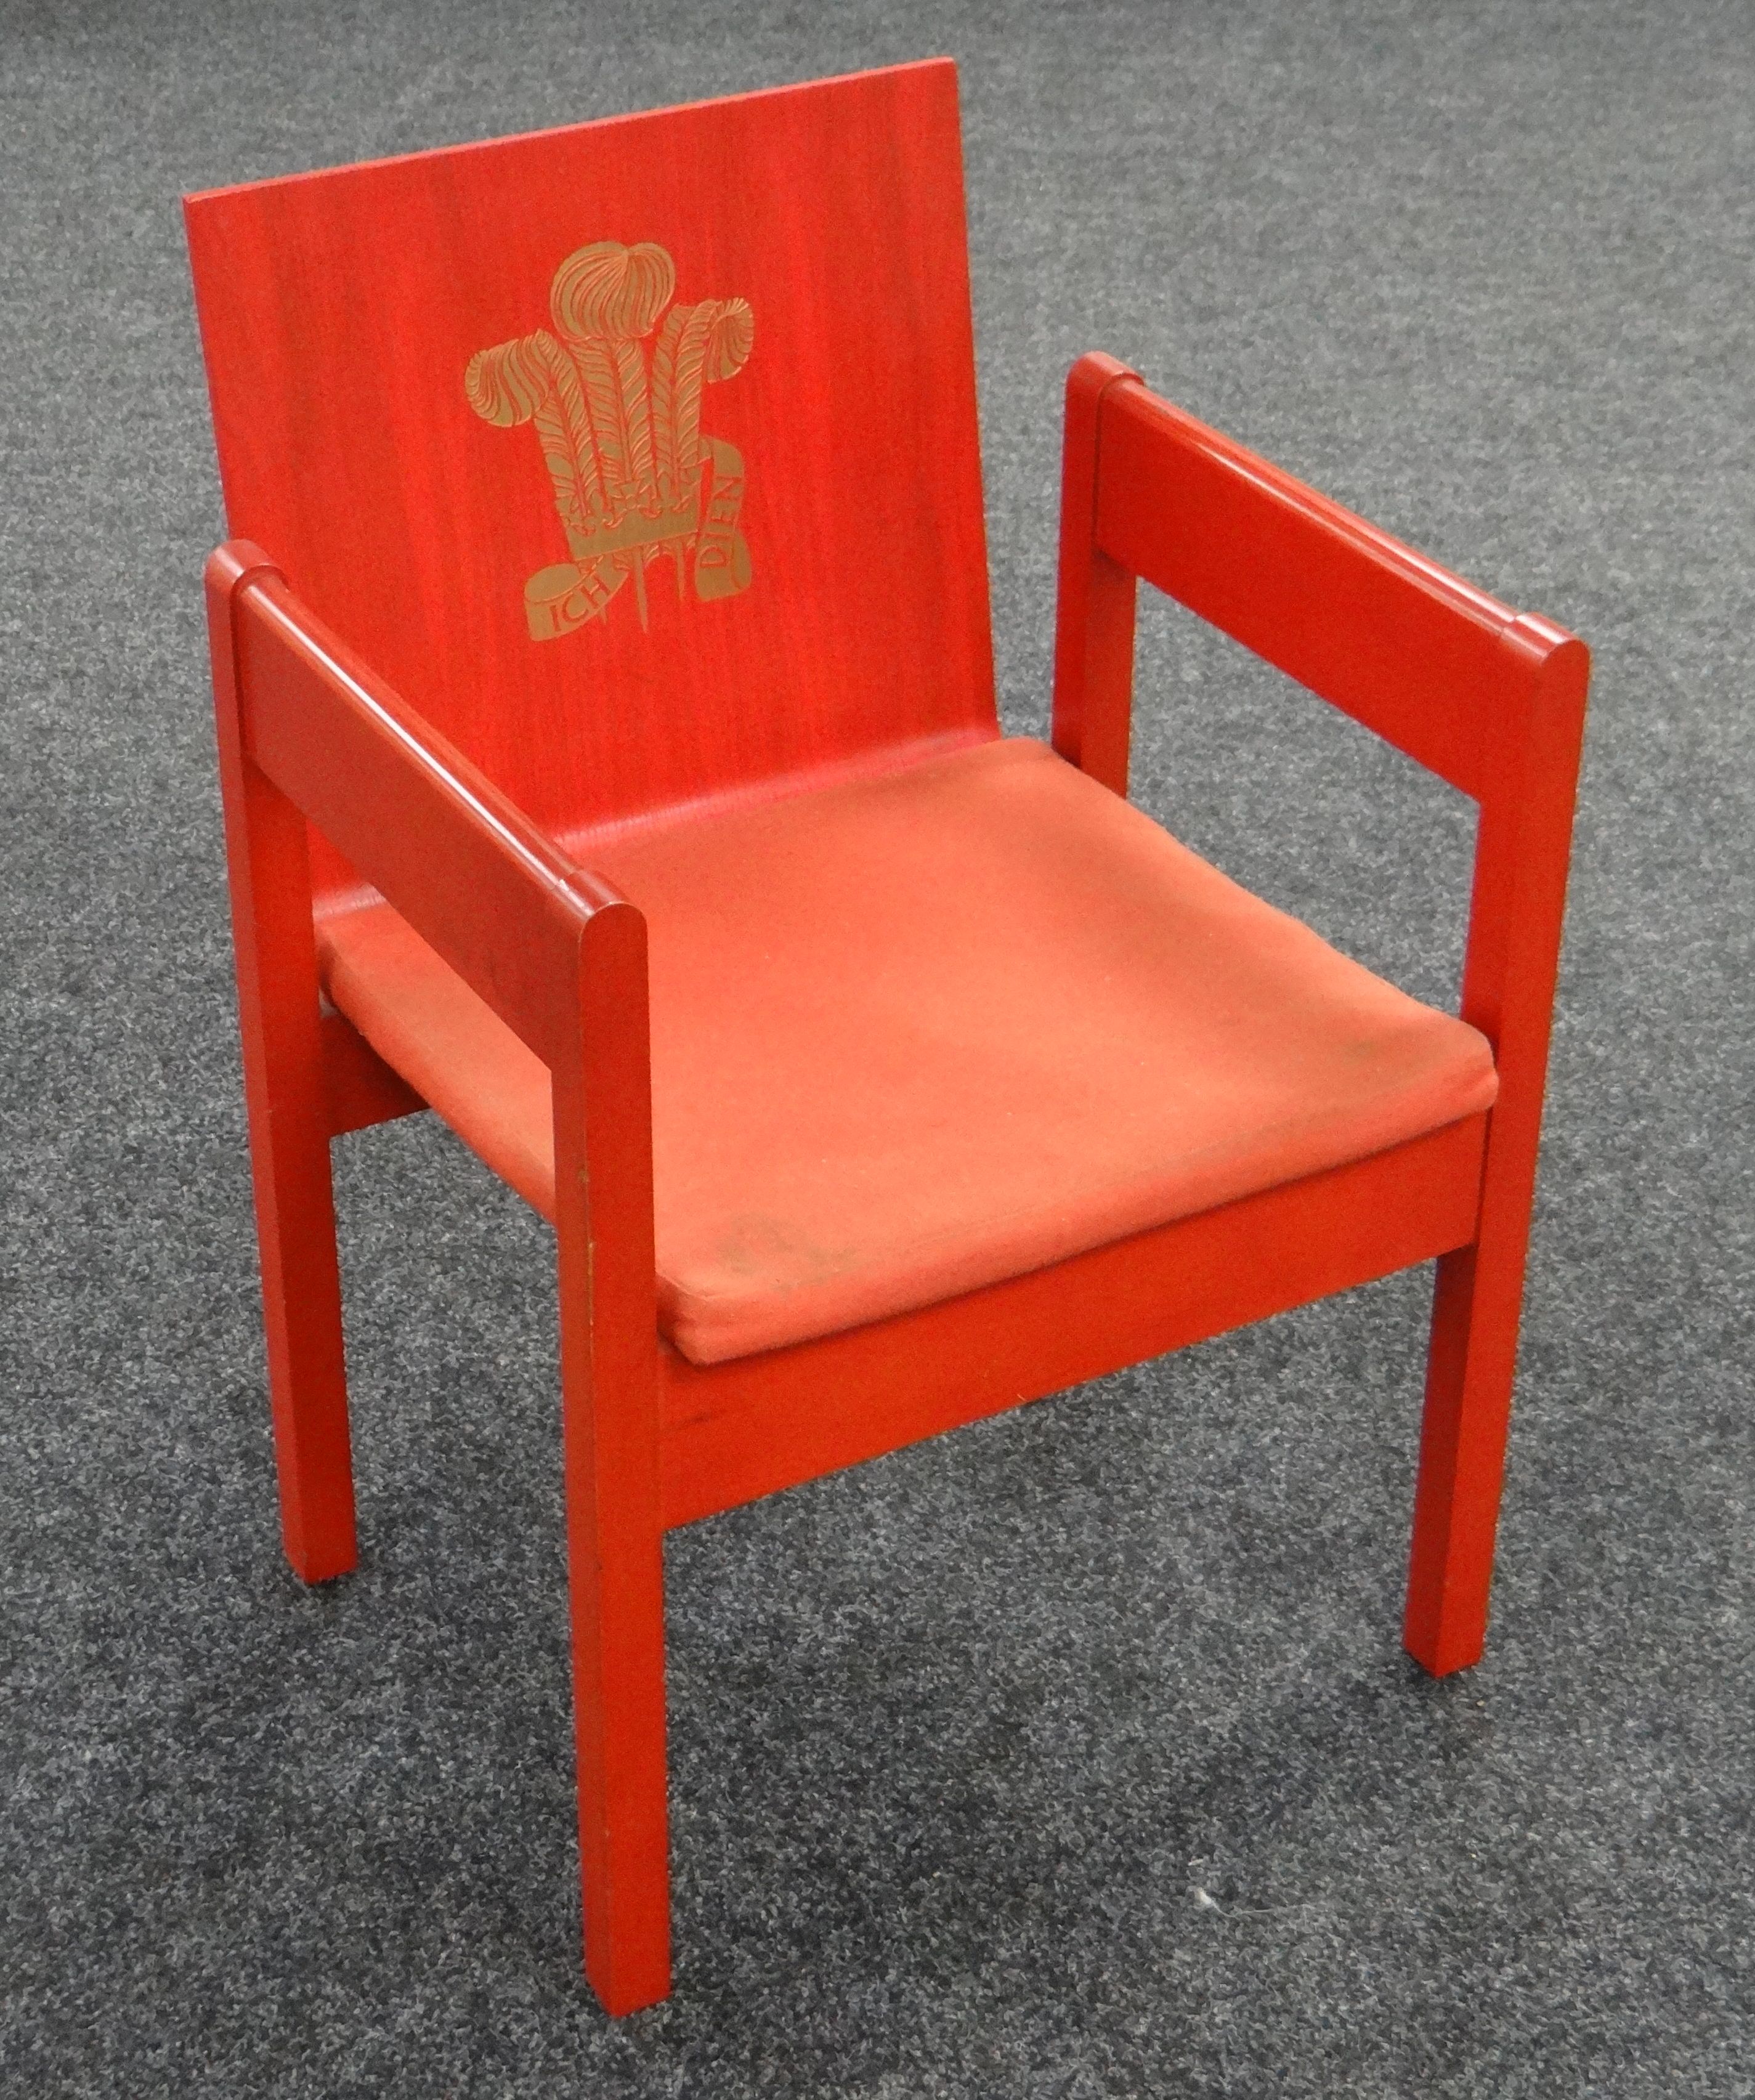 AN INVESTITURE CHAIR an icon of design being the 1969 Prince of Wales Investiture chair by Lord